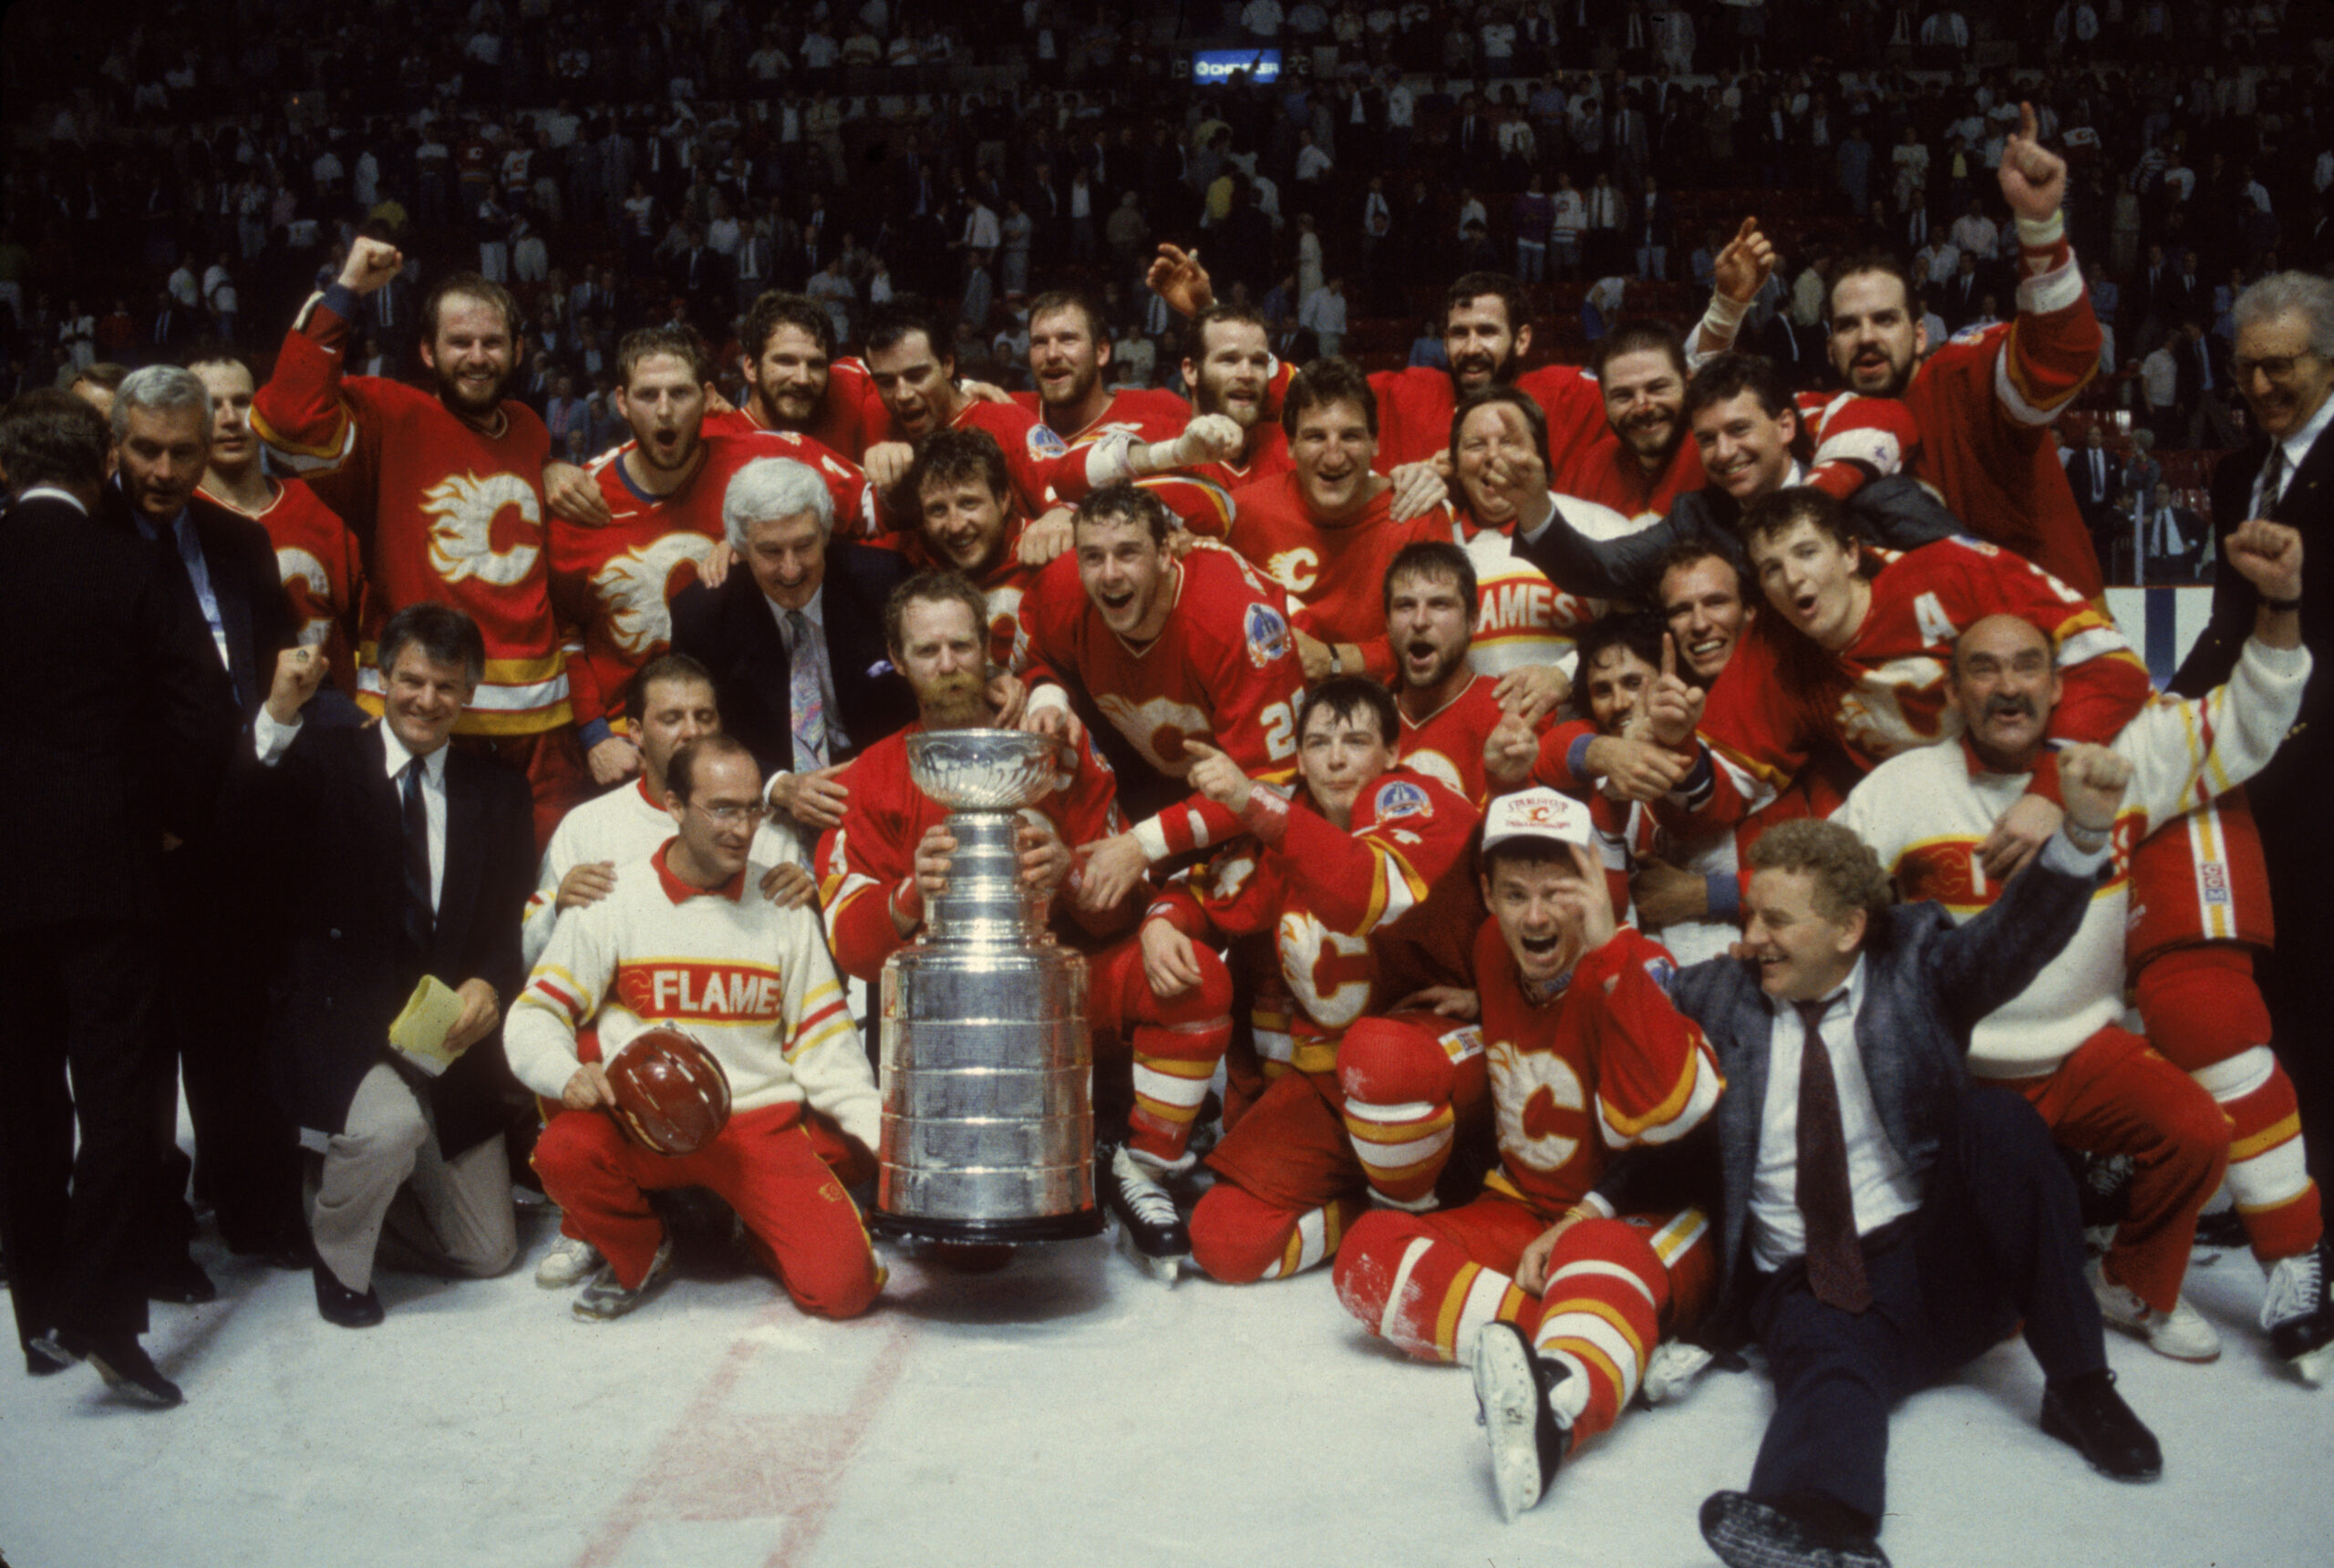 108 1972 Stanley Cup Finals Photos & High Res Pictures - Getty Images